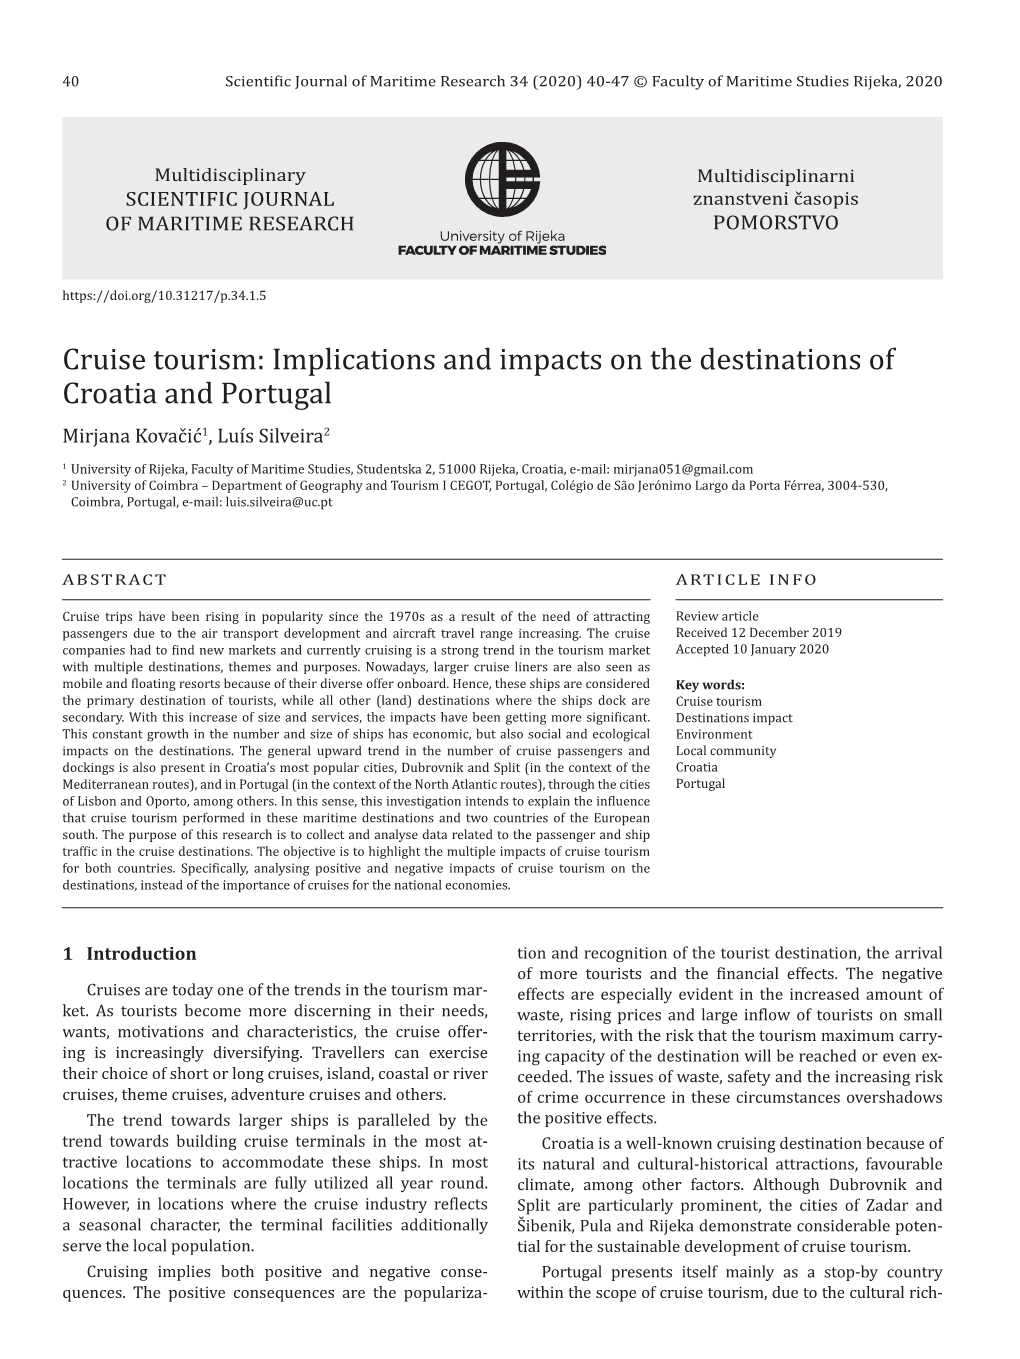 Implications and Impacts on the Destinations of Croatia and Portugal